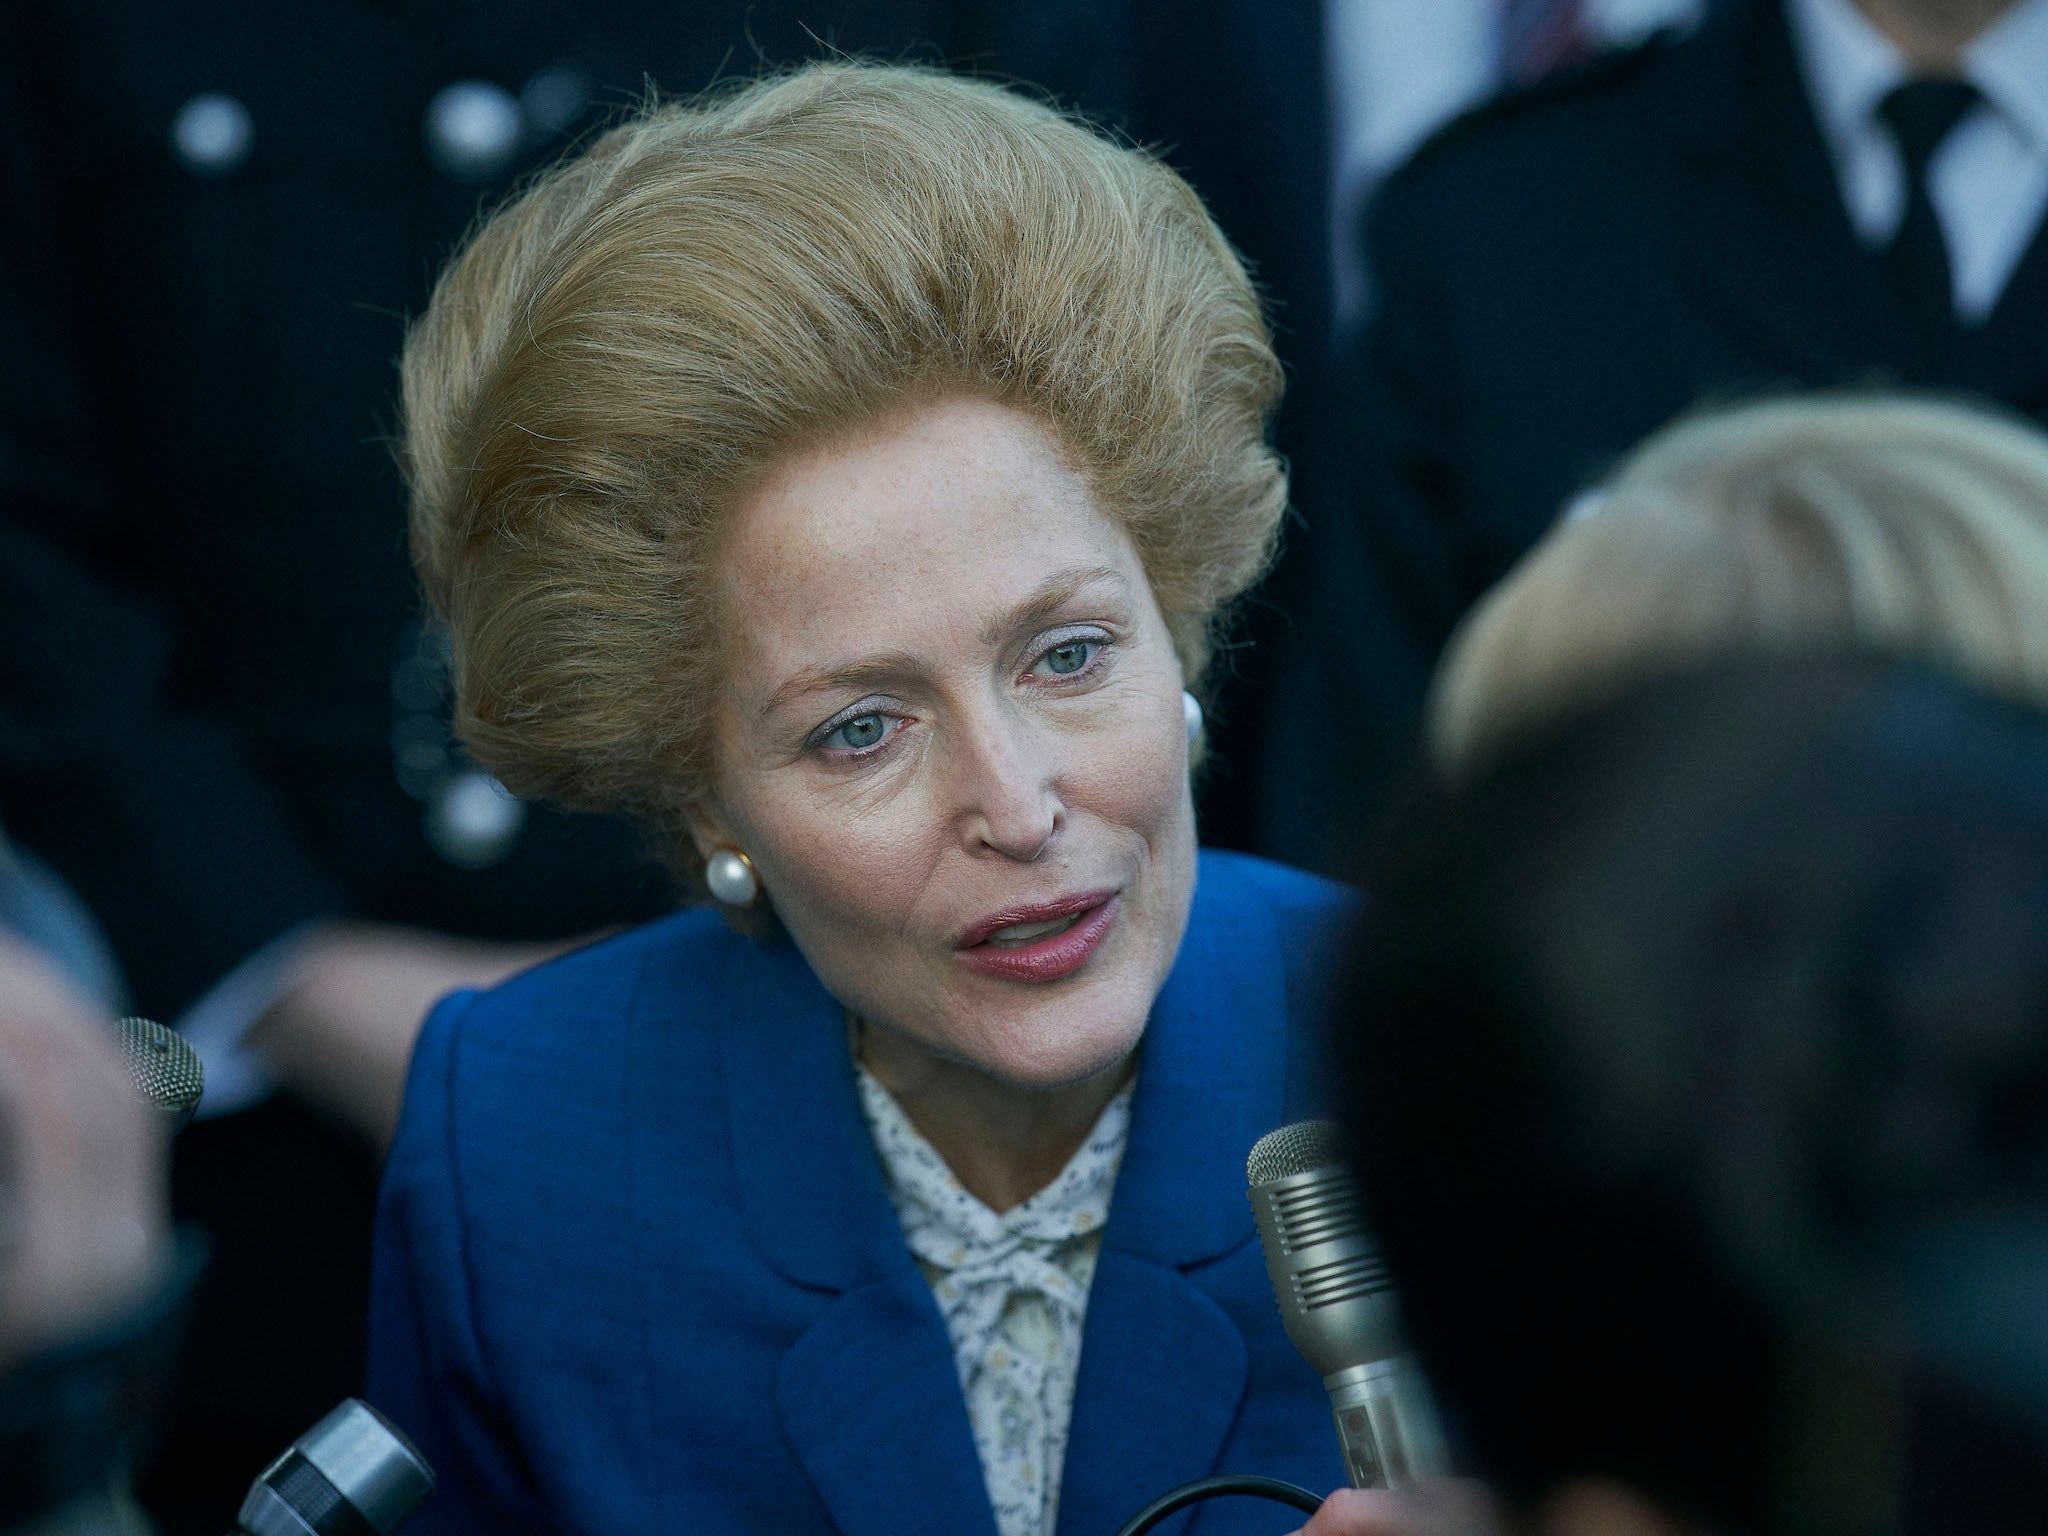 Gillian Anderson’s portrayal has been commended in early reviews of the season